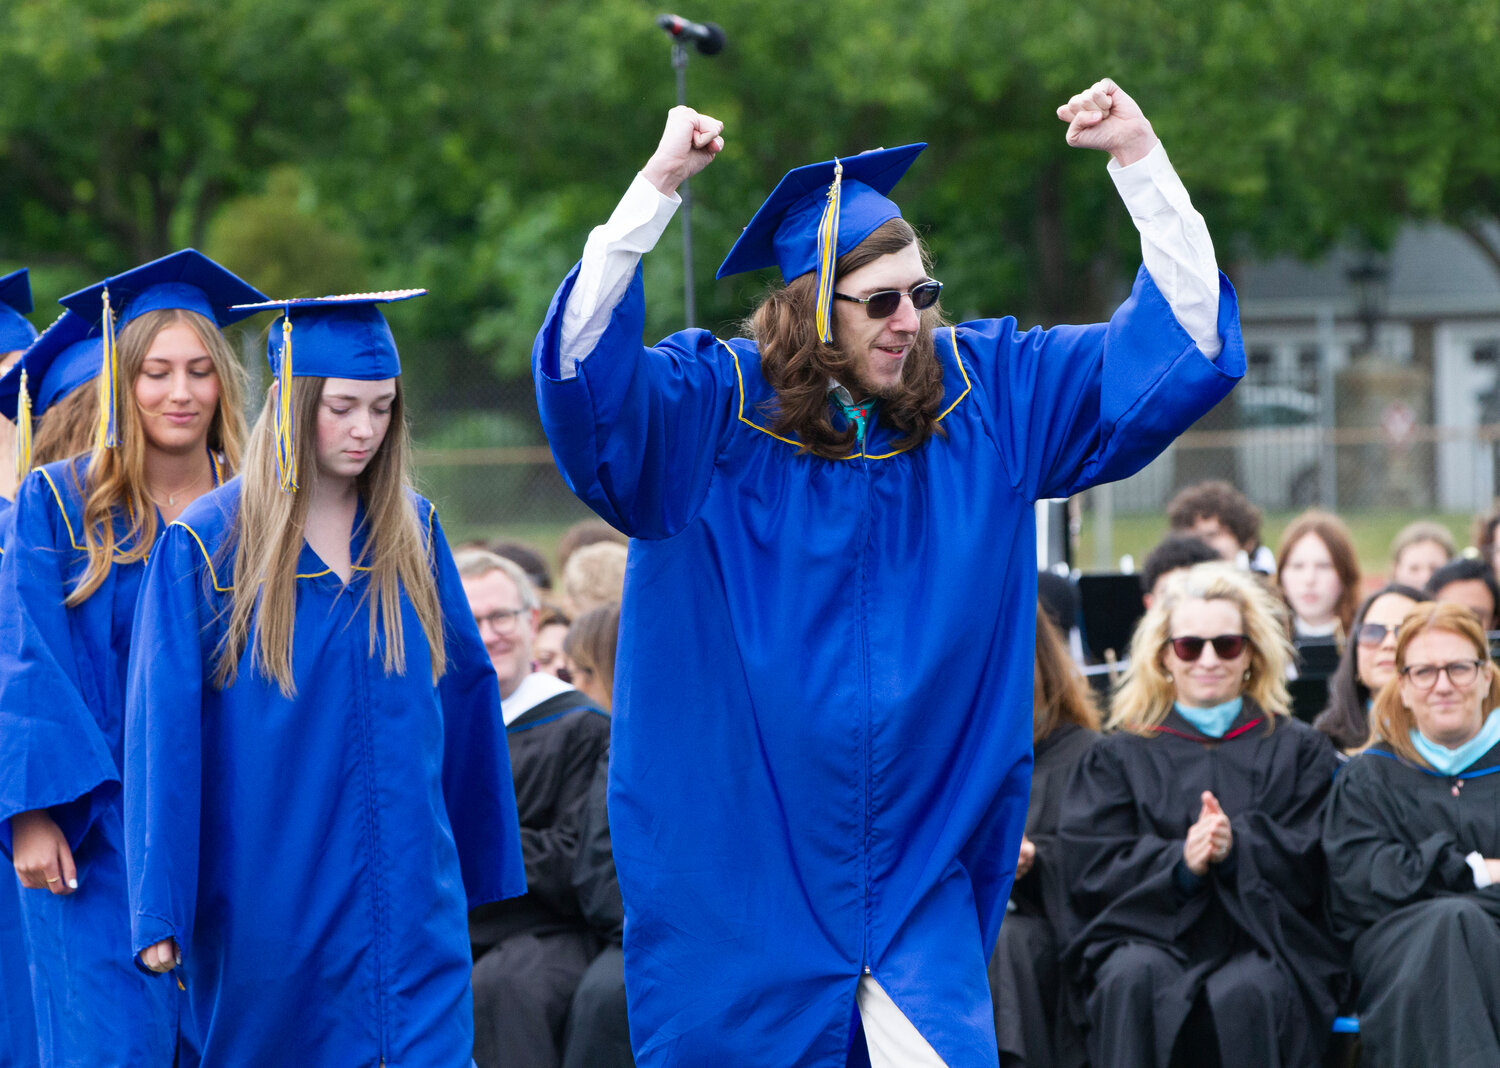 Kyler Romano pumps his fists in the air as his name is called during the BHS graduation ceremony on Sunday.